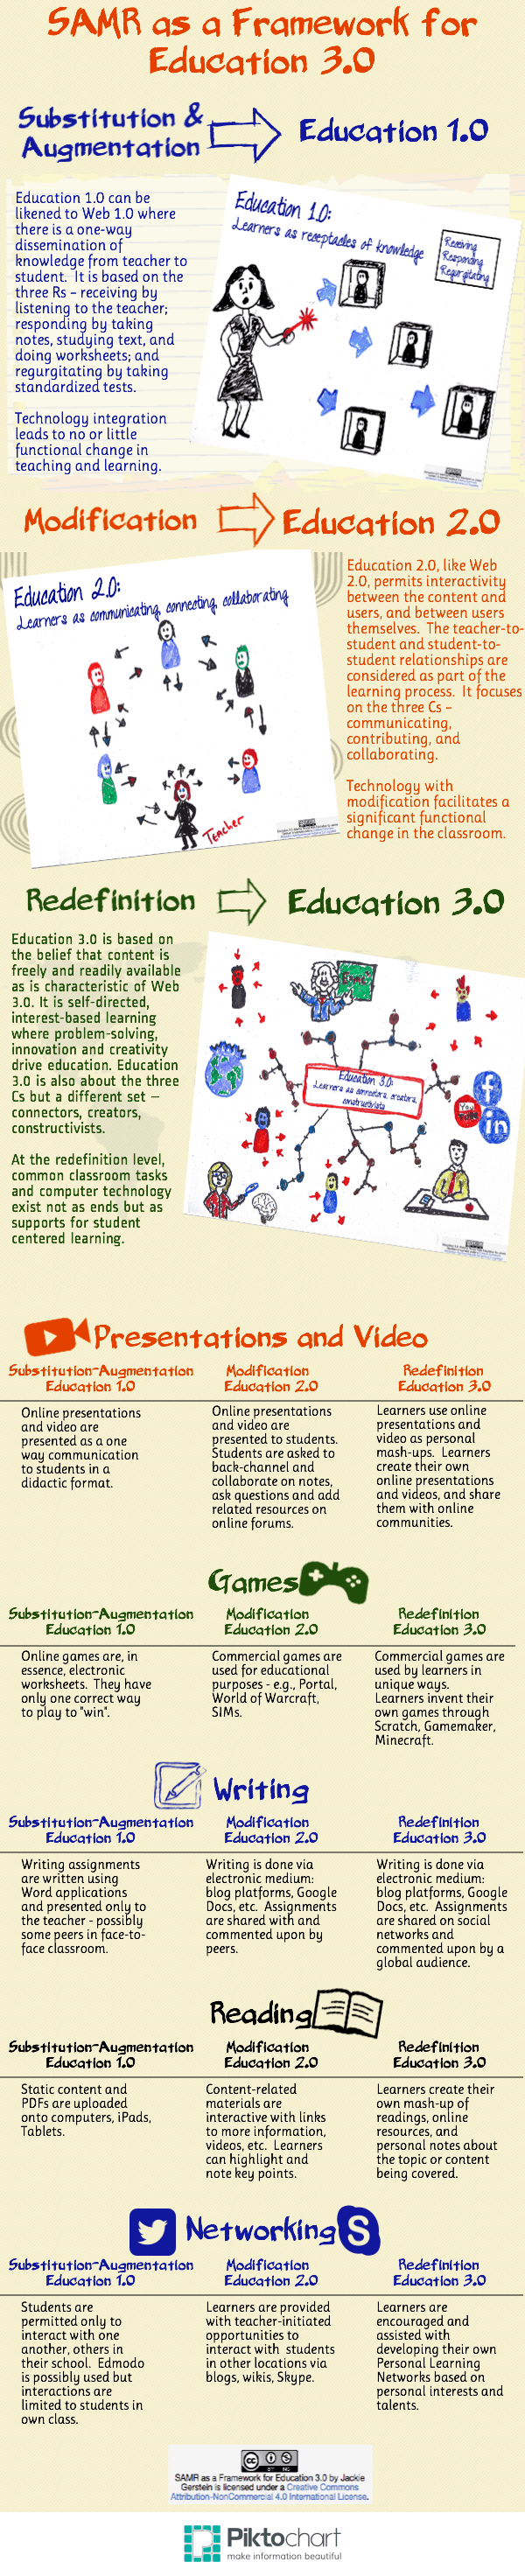 A-Framework-for-Moving-Towards-Education-3.0-Infographic